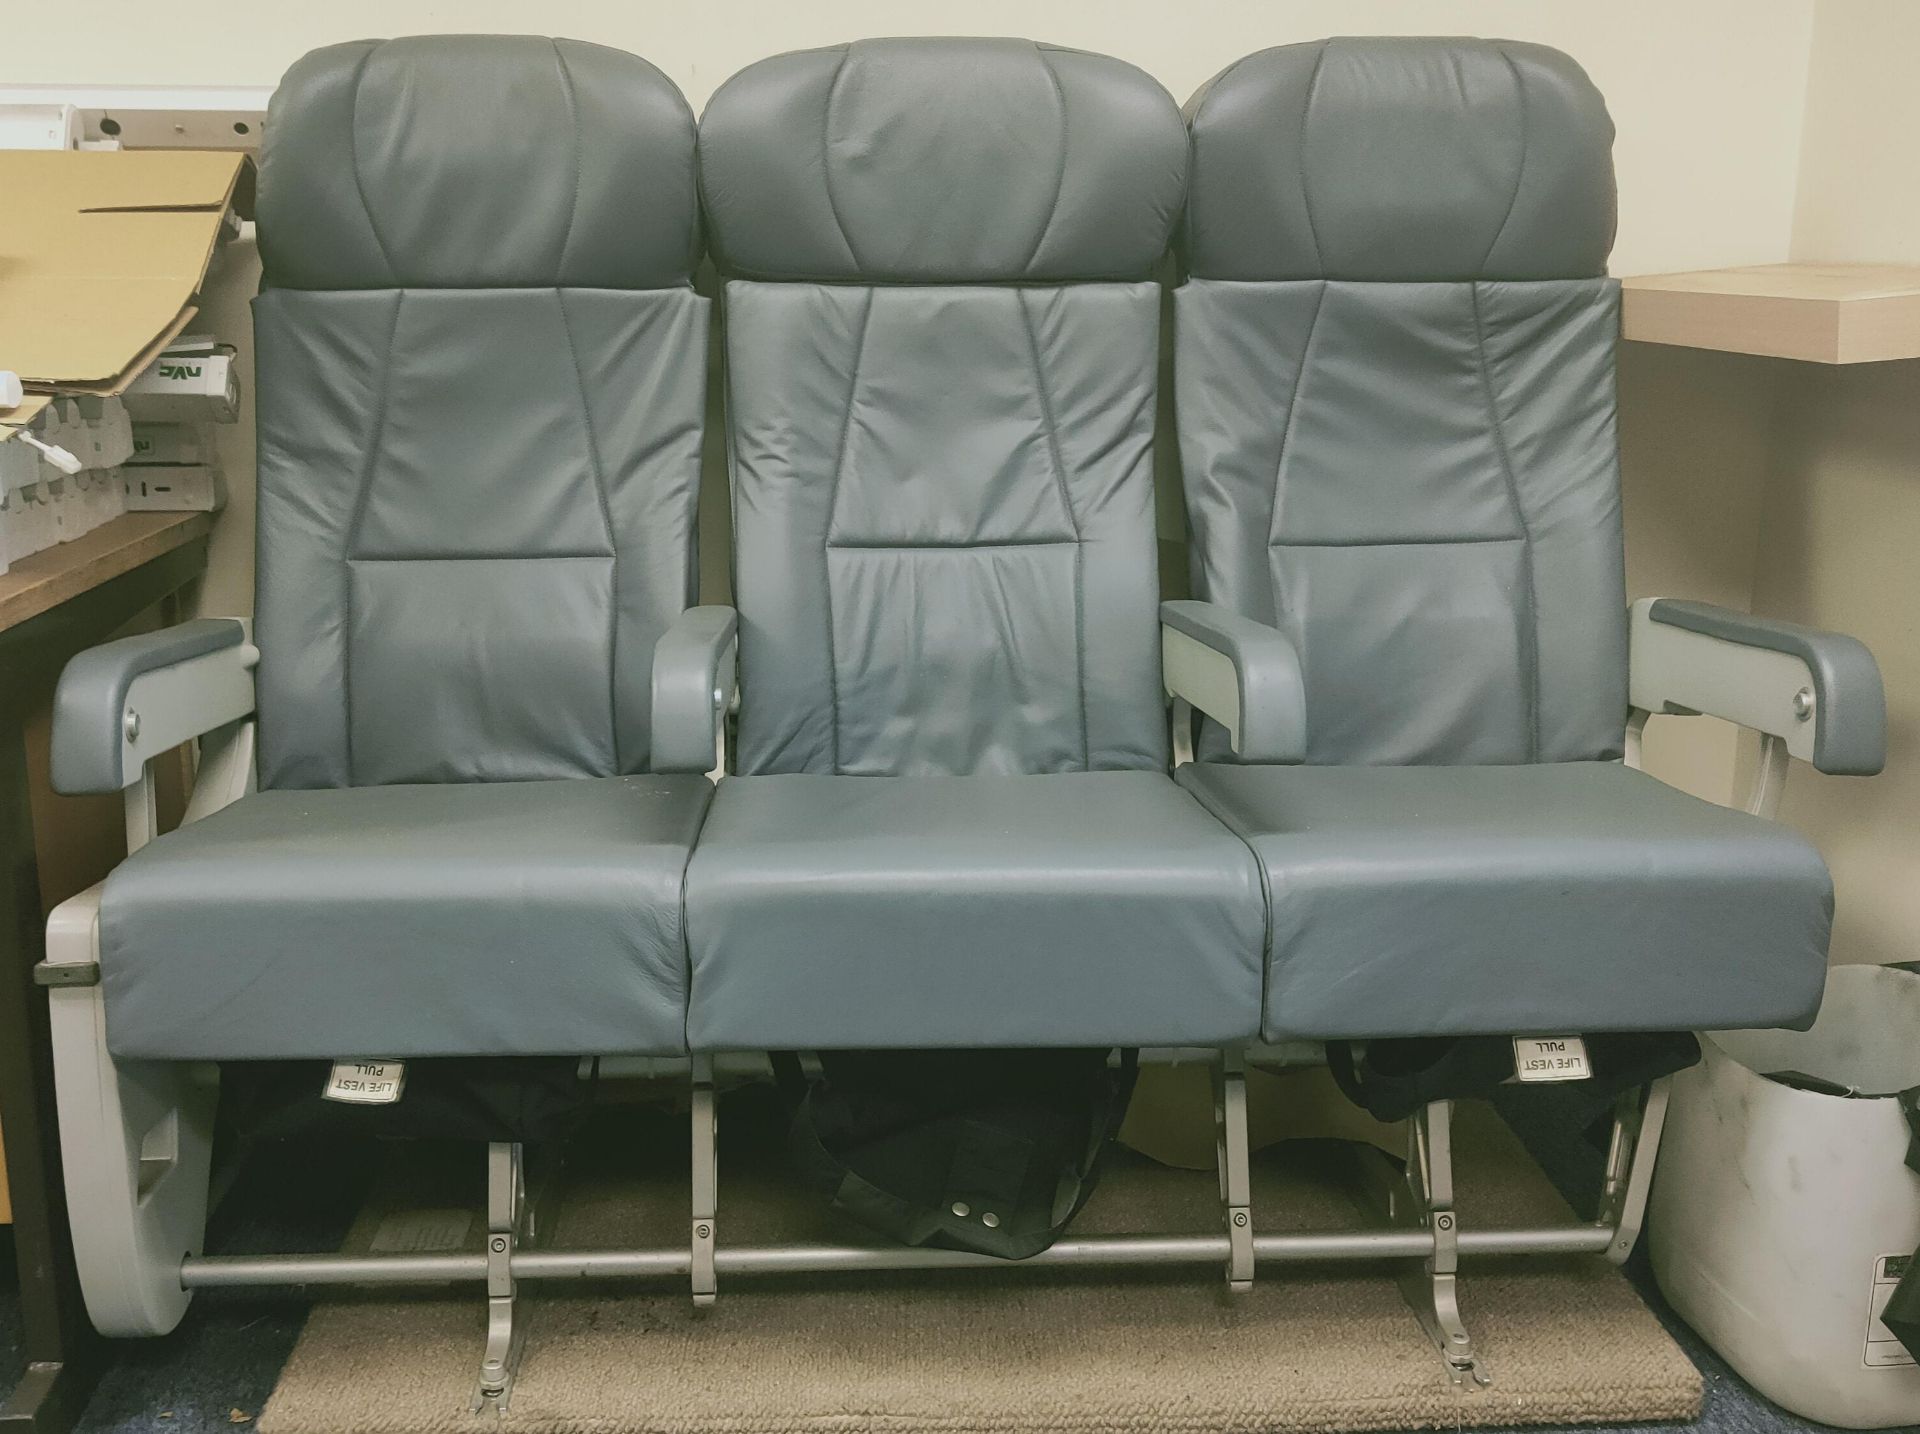 Set of Three Unused Leather Airplane Seats, loading free of charge - yes (vendors comments - unused)